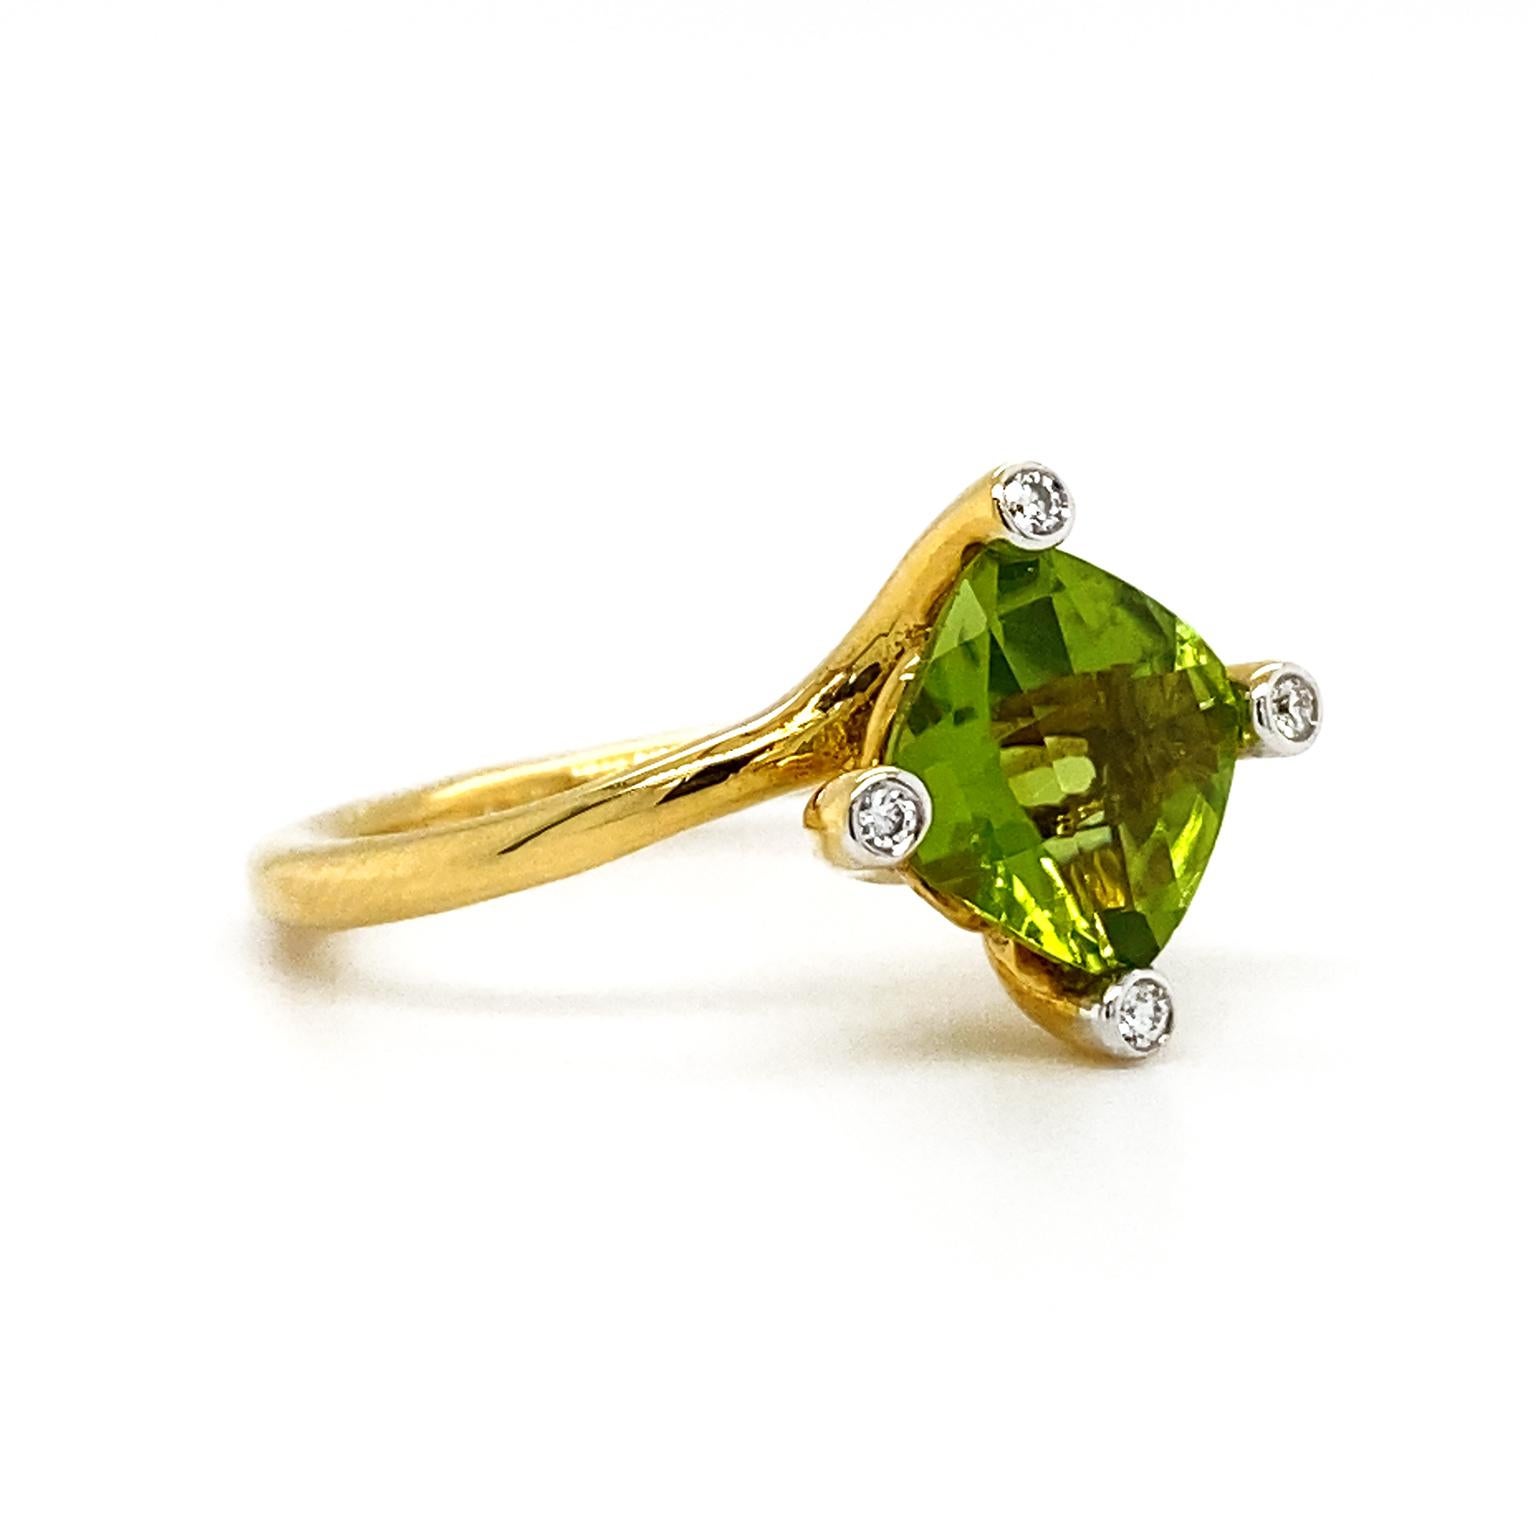 A lustrous cushion cut peridot is heightened with four bezel set brilliant cut diamonds on each corner. An 18k yellow gold band is oblique as the finishing touch. The weight of the peridot is 1.84 carats and the diamonds weigh a total of .04 carats.